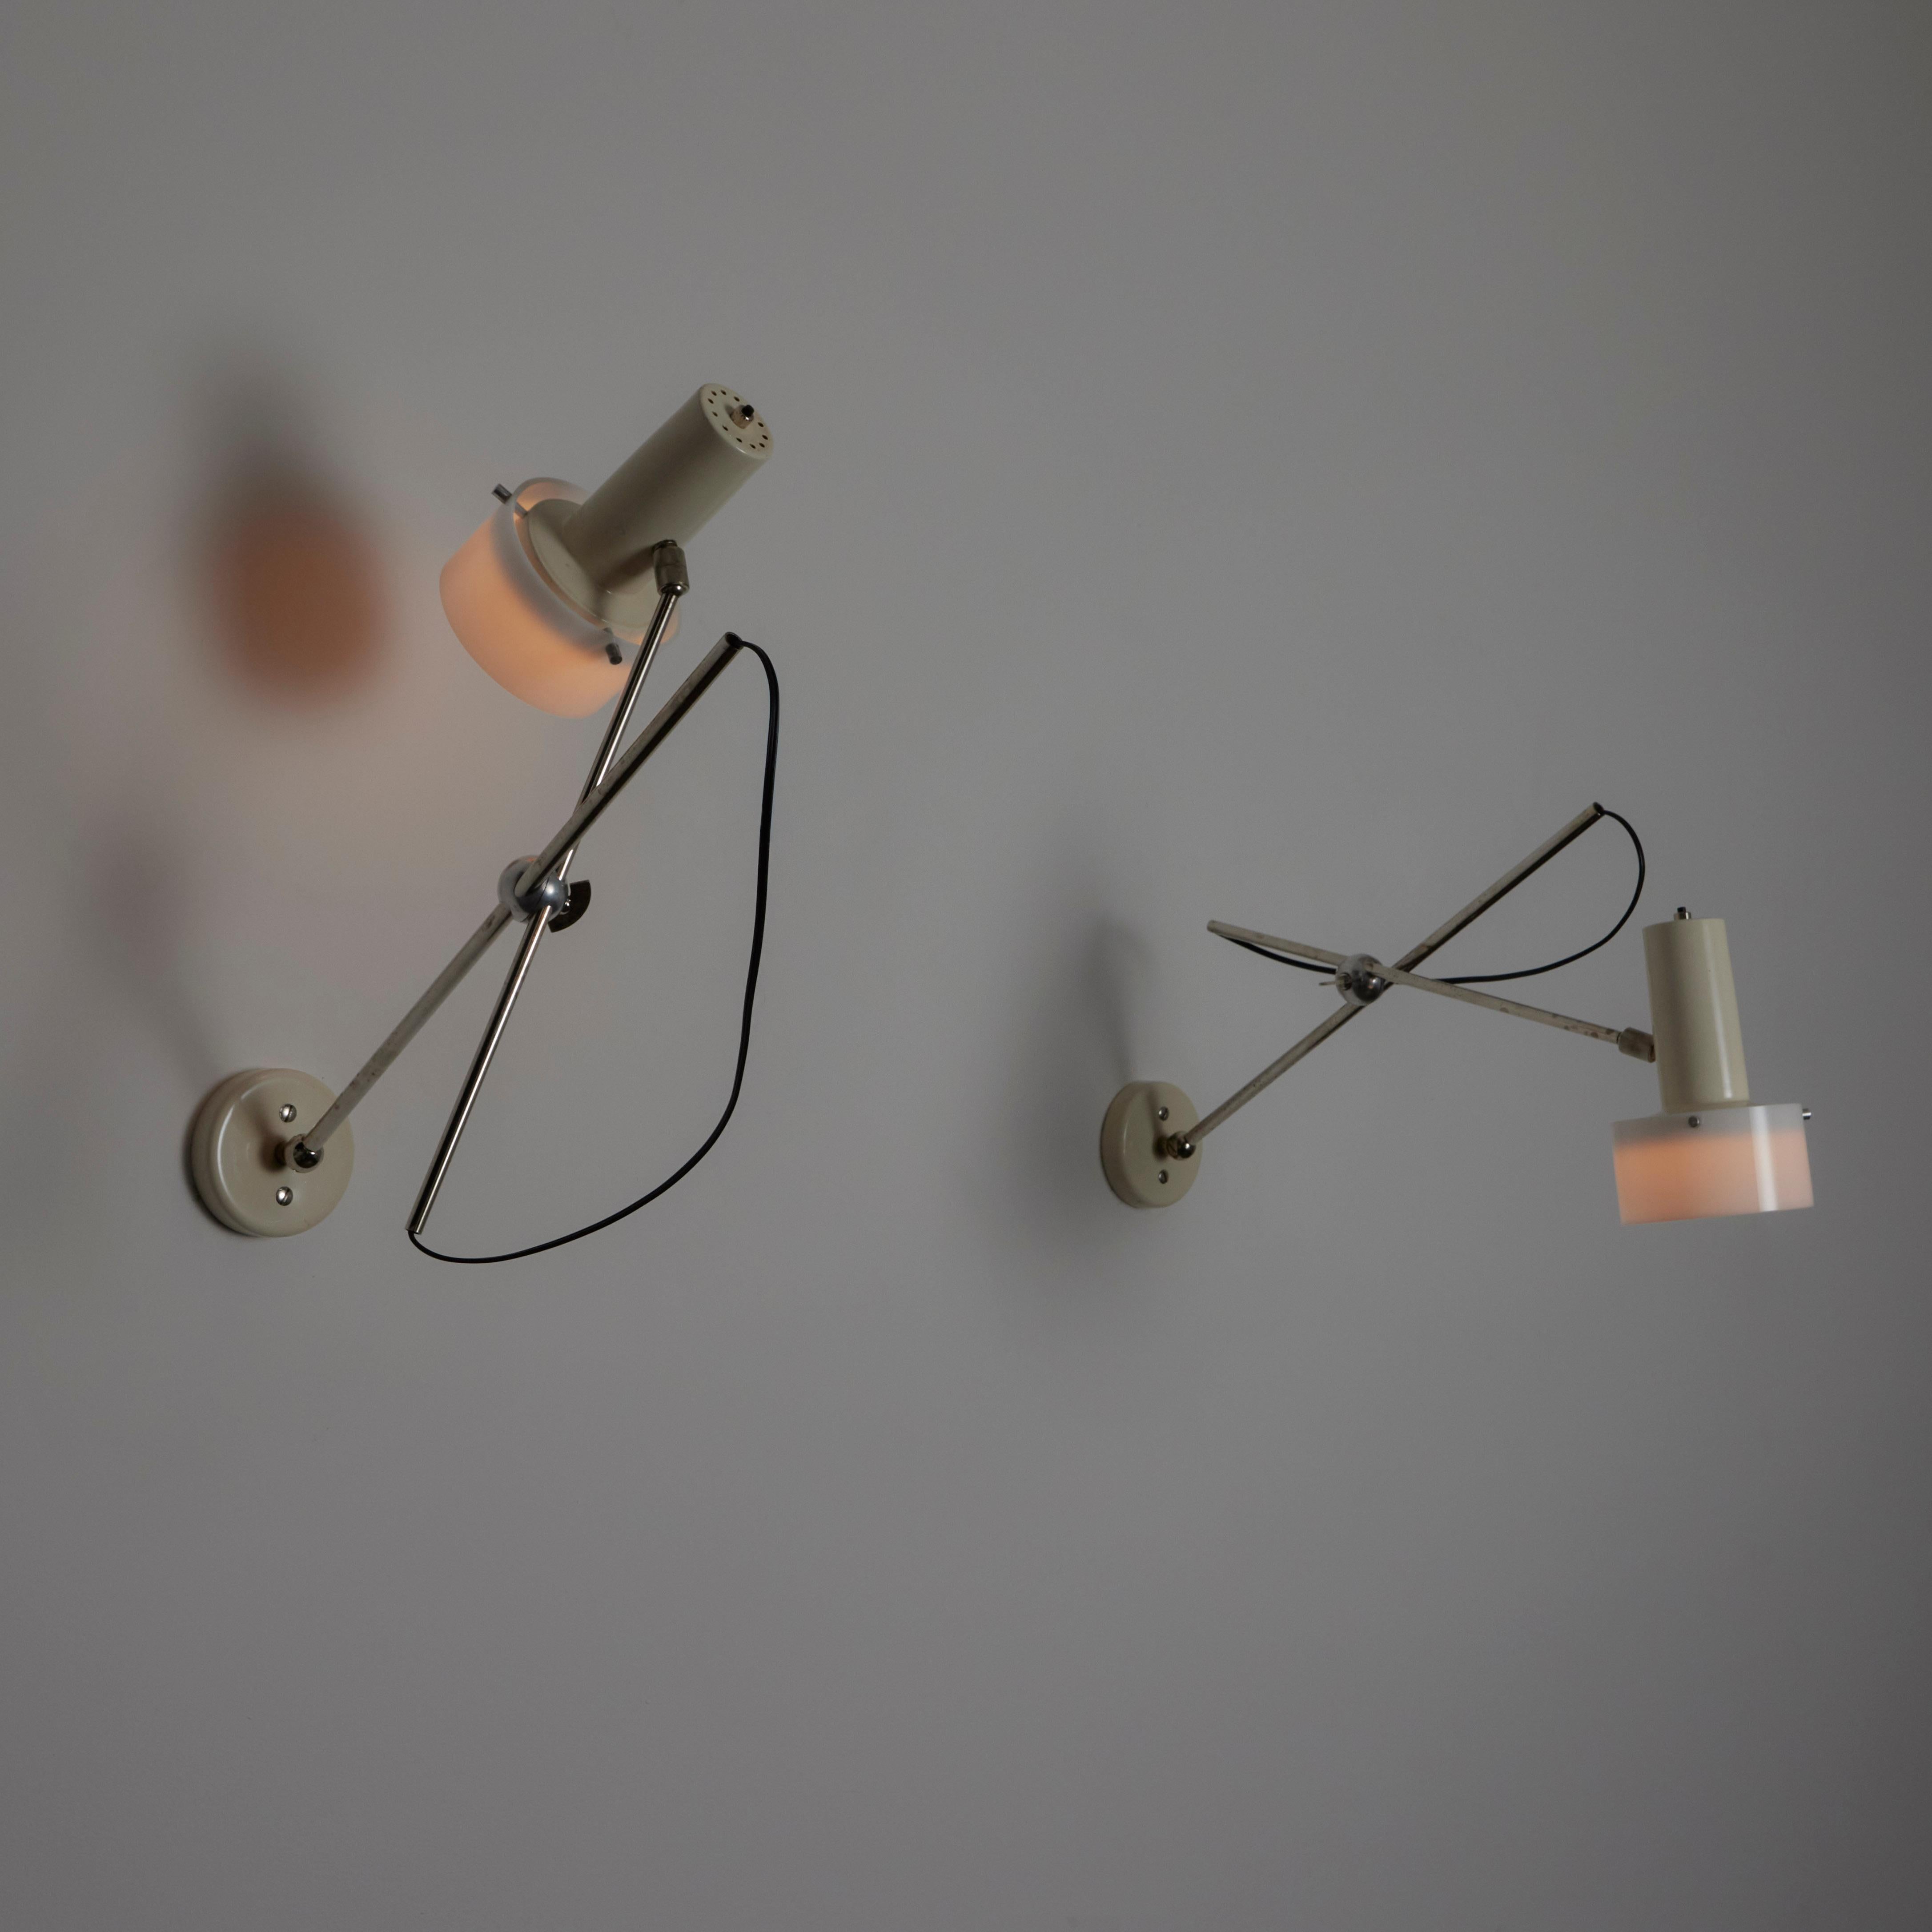 Pair of model 213 Sconces by Gino Sarfatti for Arteluce. Designed and manufactured in Italy, in 1955. Long armed articulating sconces consisting of enamel and acrylic shades and chrome stems. The chrome stems have multi point swivels, allowing for